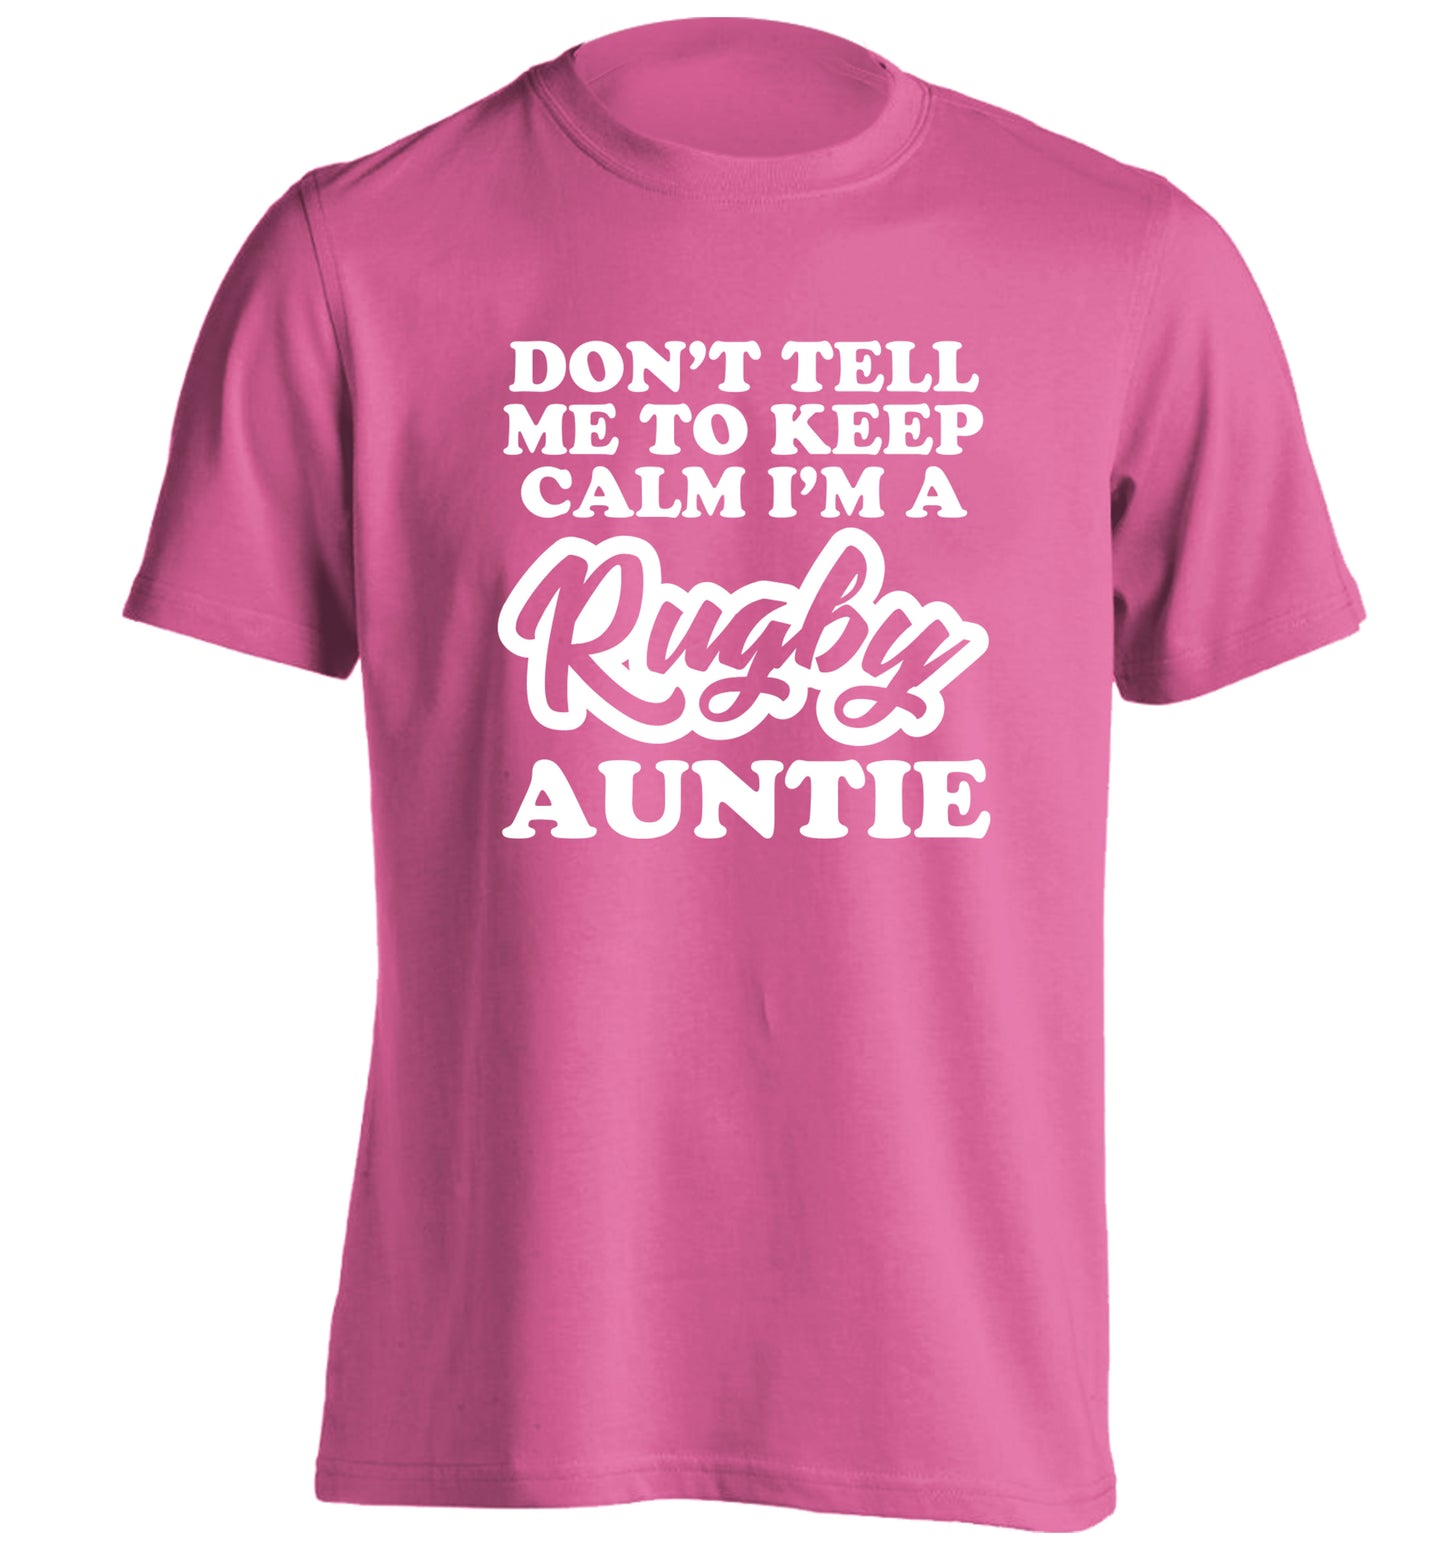 Don't tell me keep calm I'm a rugby auntie adults unisex pink Tshirt 2XL